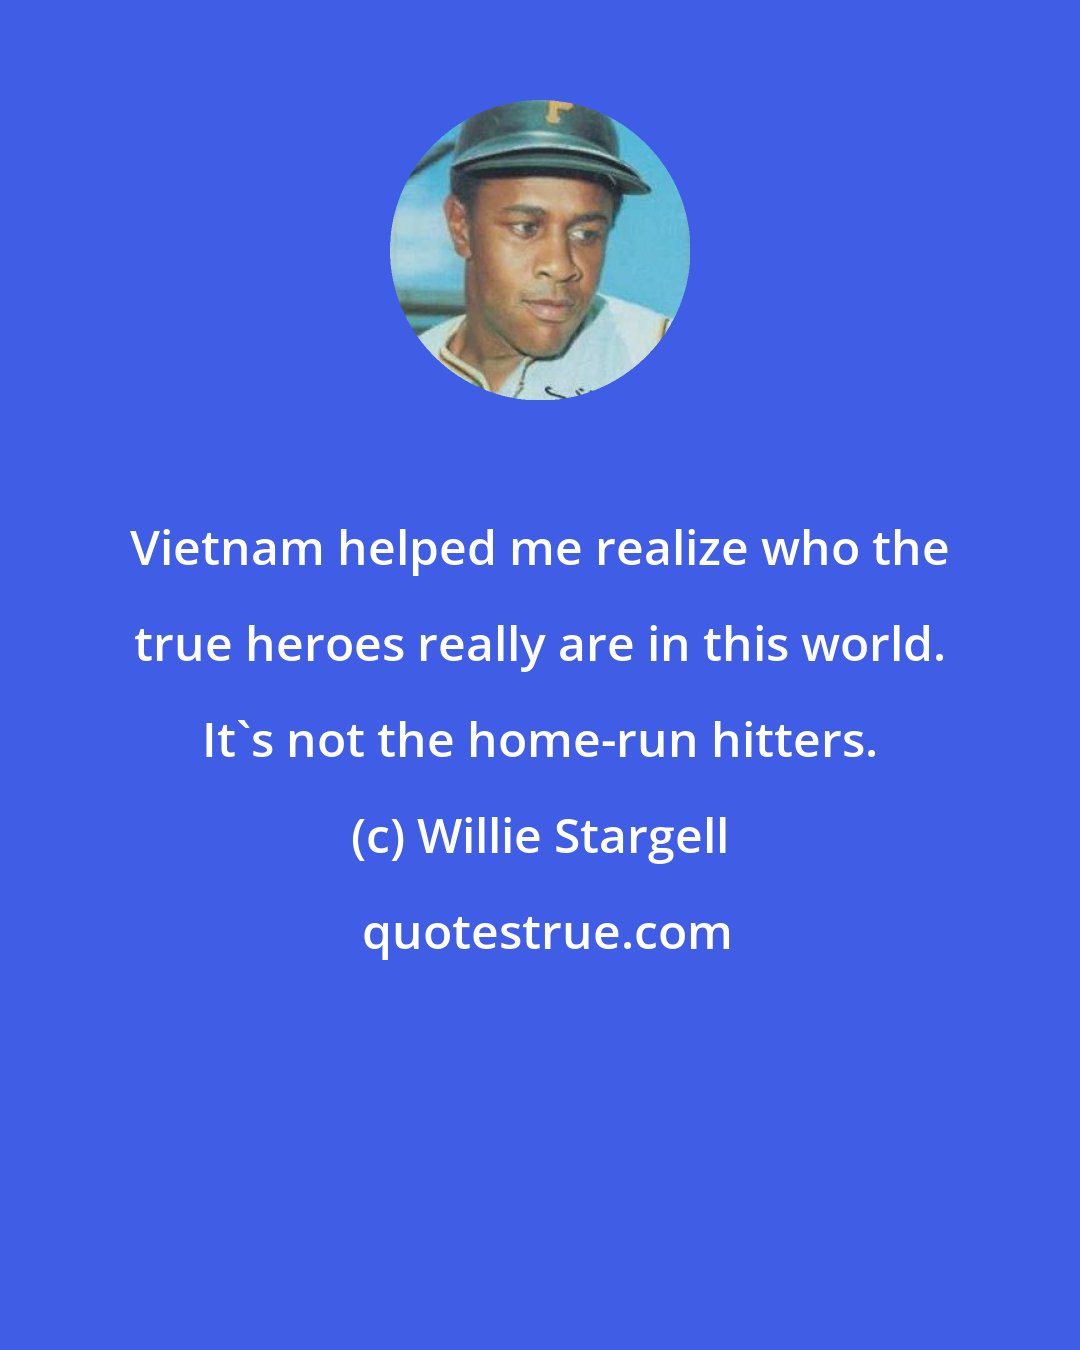 Willie Stargell: Vietnam helped me realize who the true heroes really are in this world. It's not the home-run hitters.